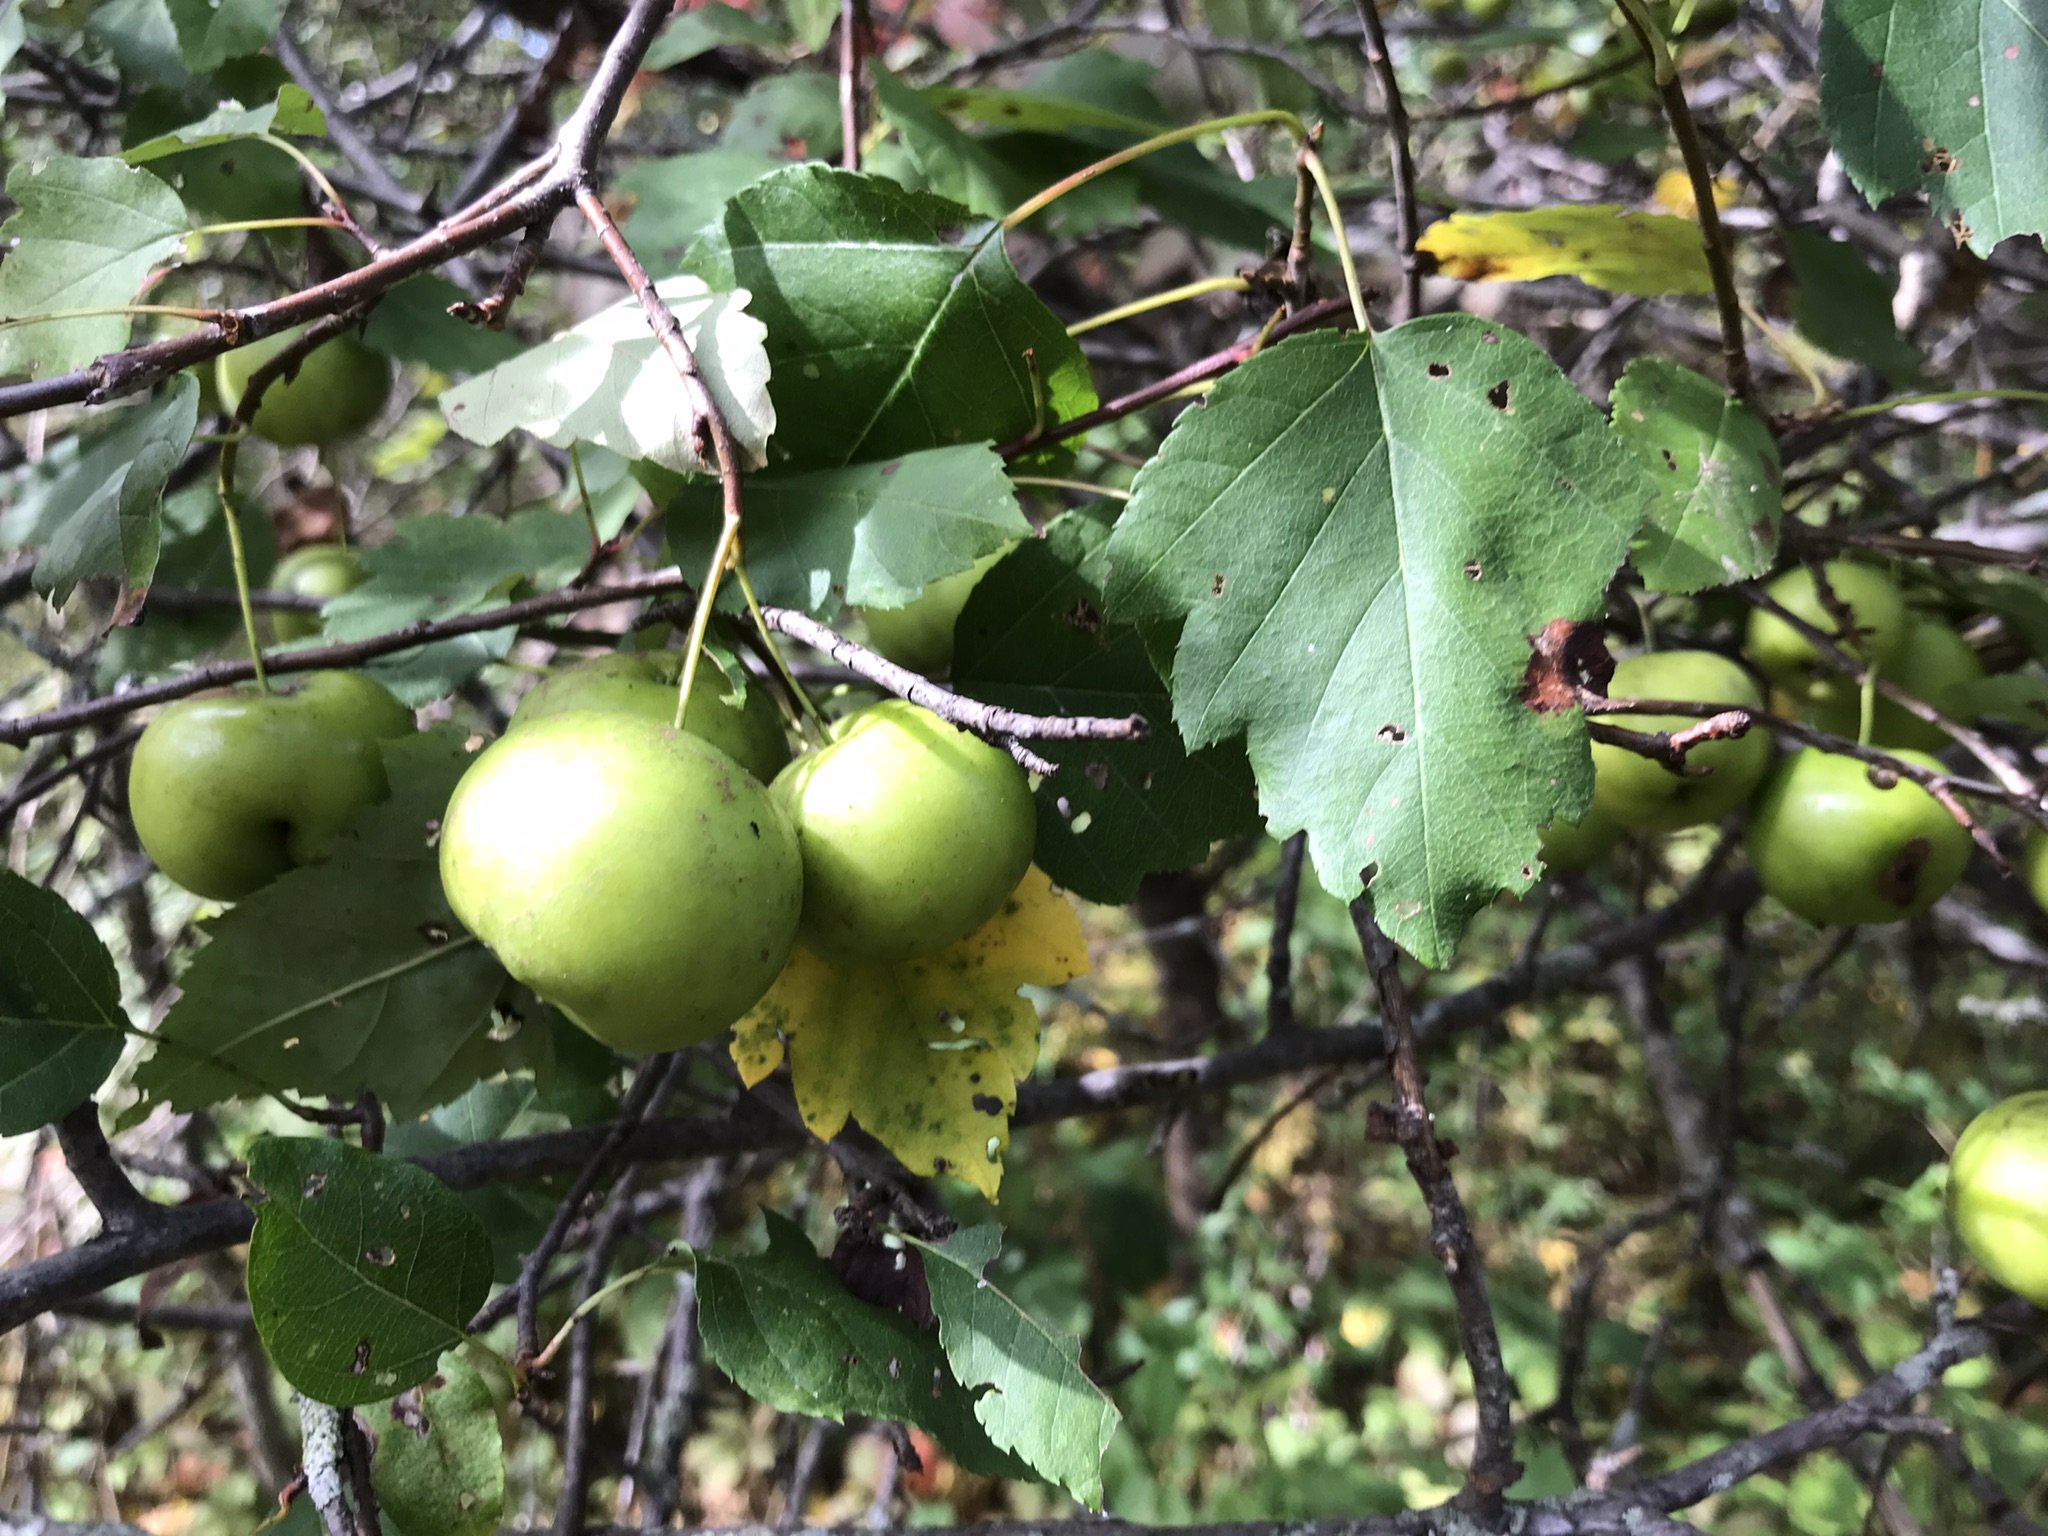  One of our sites had several native American Crabapple trees, with their characteristically green fruit. These fruits are larger than the typical cultivated crabapples one may be more familiar with (Photo by Kasia Zgurzynski). 